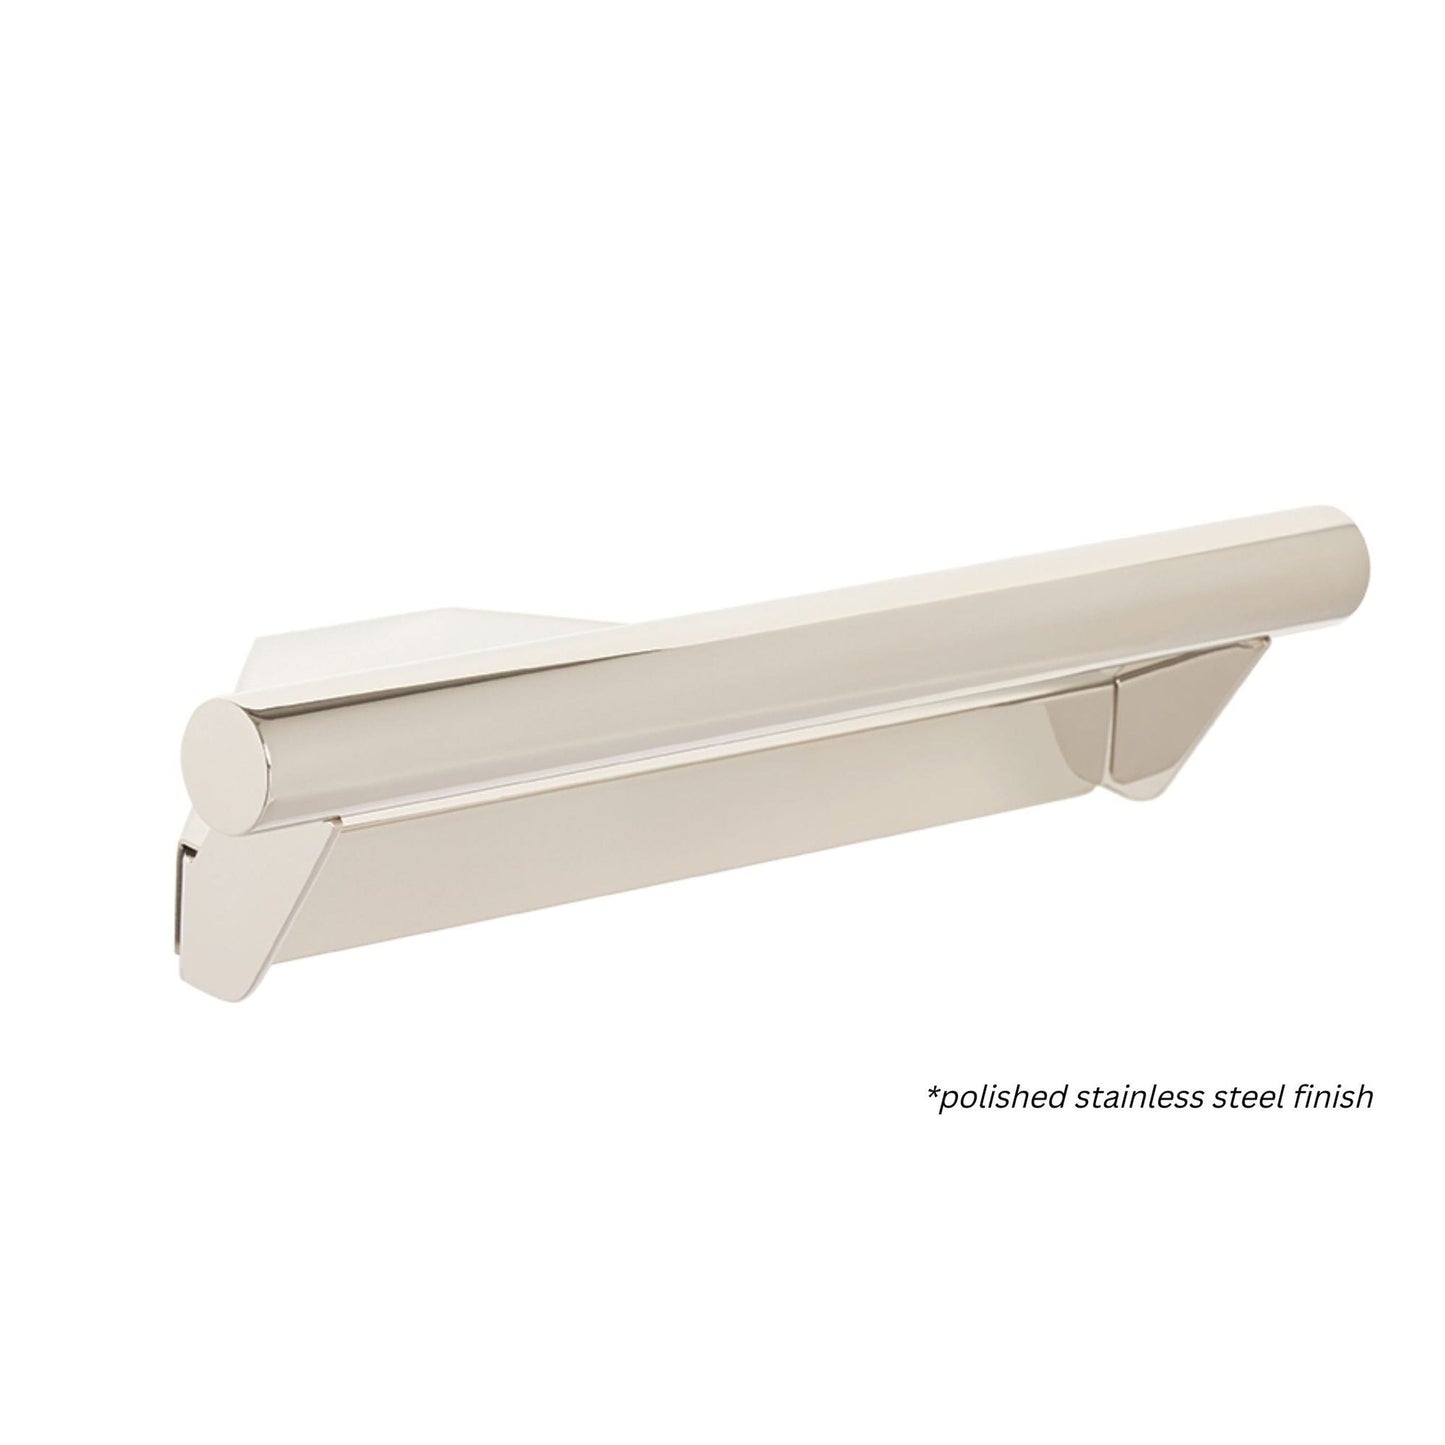 Seachrome Lifestyle and Wellness Series 14" x 8.5" Corner Shower Shelf With Handle in Almond Powder Coated Stainless Finish